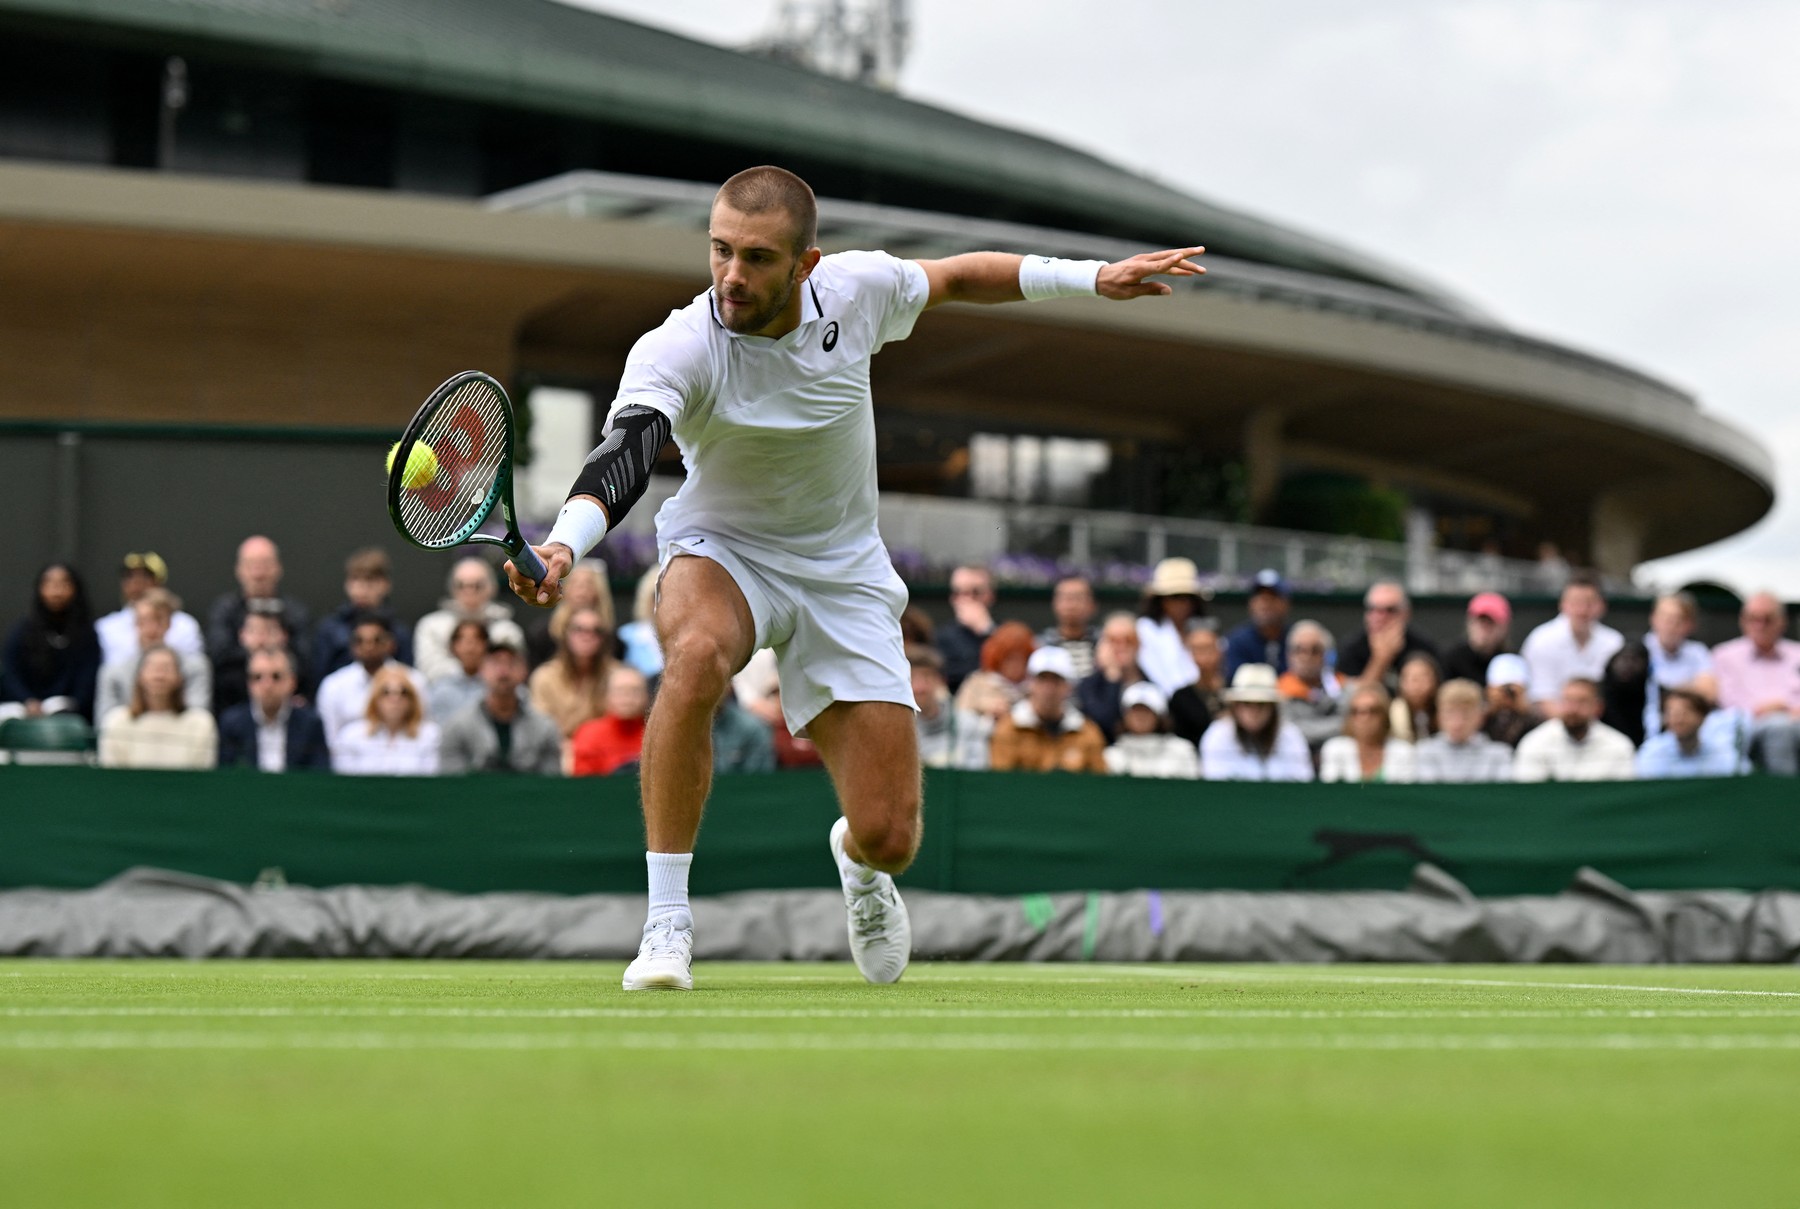 Croatia's Borna Coric returns against US player Frances Tiafoe during their men's singles second round tennis match on the third day of the 2024 Wimbledon Championships at The All England Lawn Tennis and Croquet Club in Wimbledon, southwest London, on July 3, 2024.,Image: 886957428, License: Rights-managed, Restrictions: RESTRICTED TO EDITORIAL USE, Model Release: no, Credit line: Glyn KIRK / AFP / Profimedia